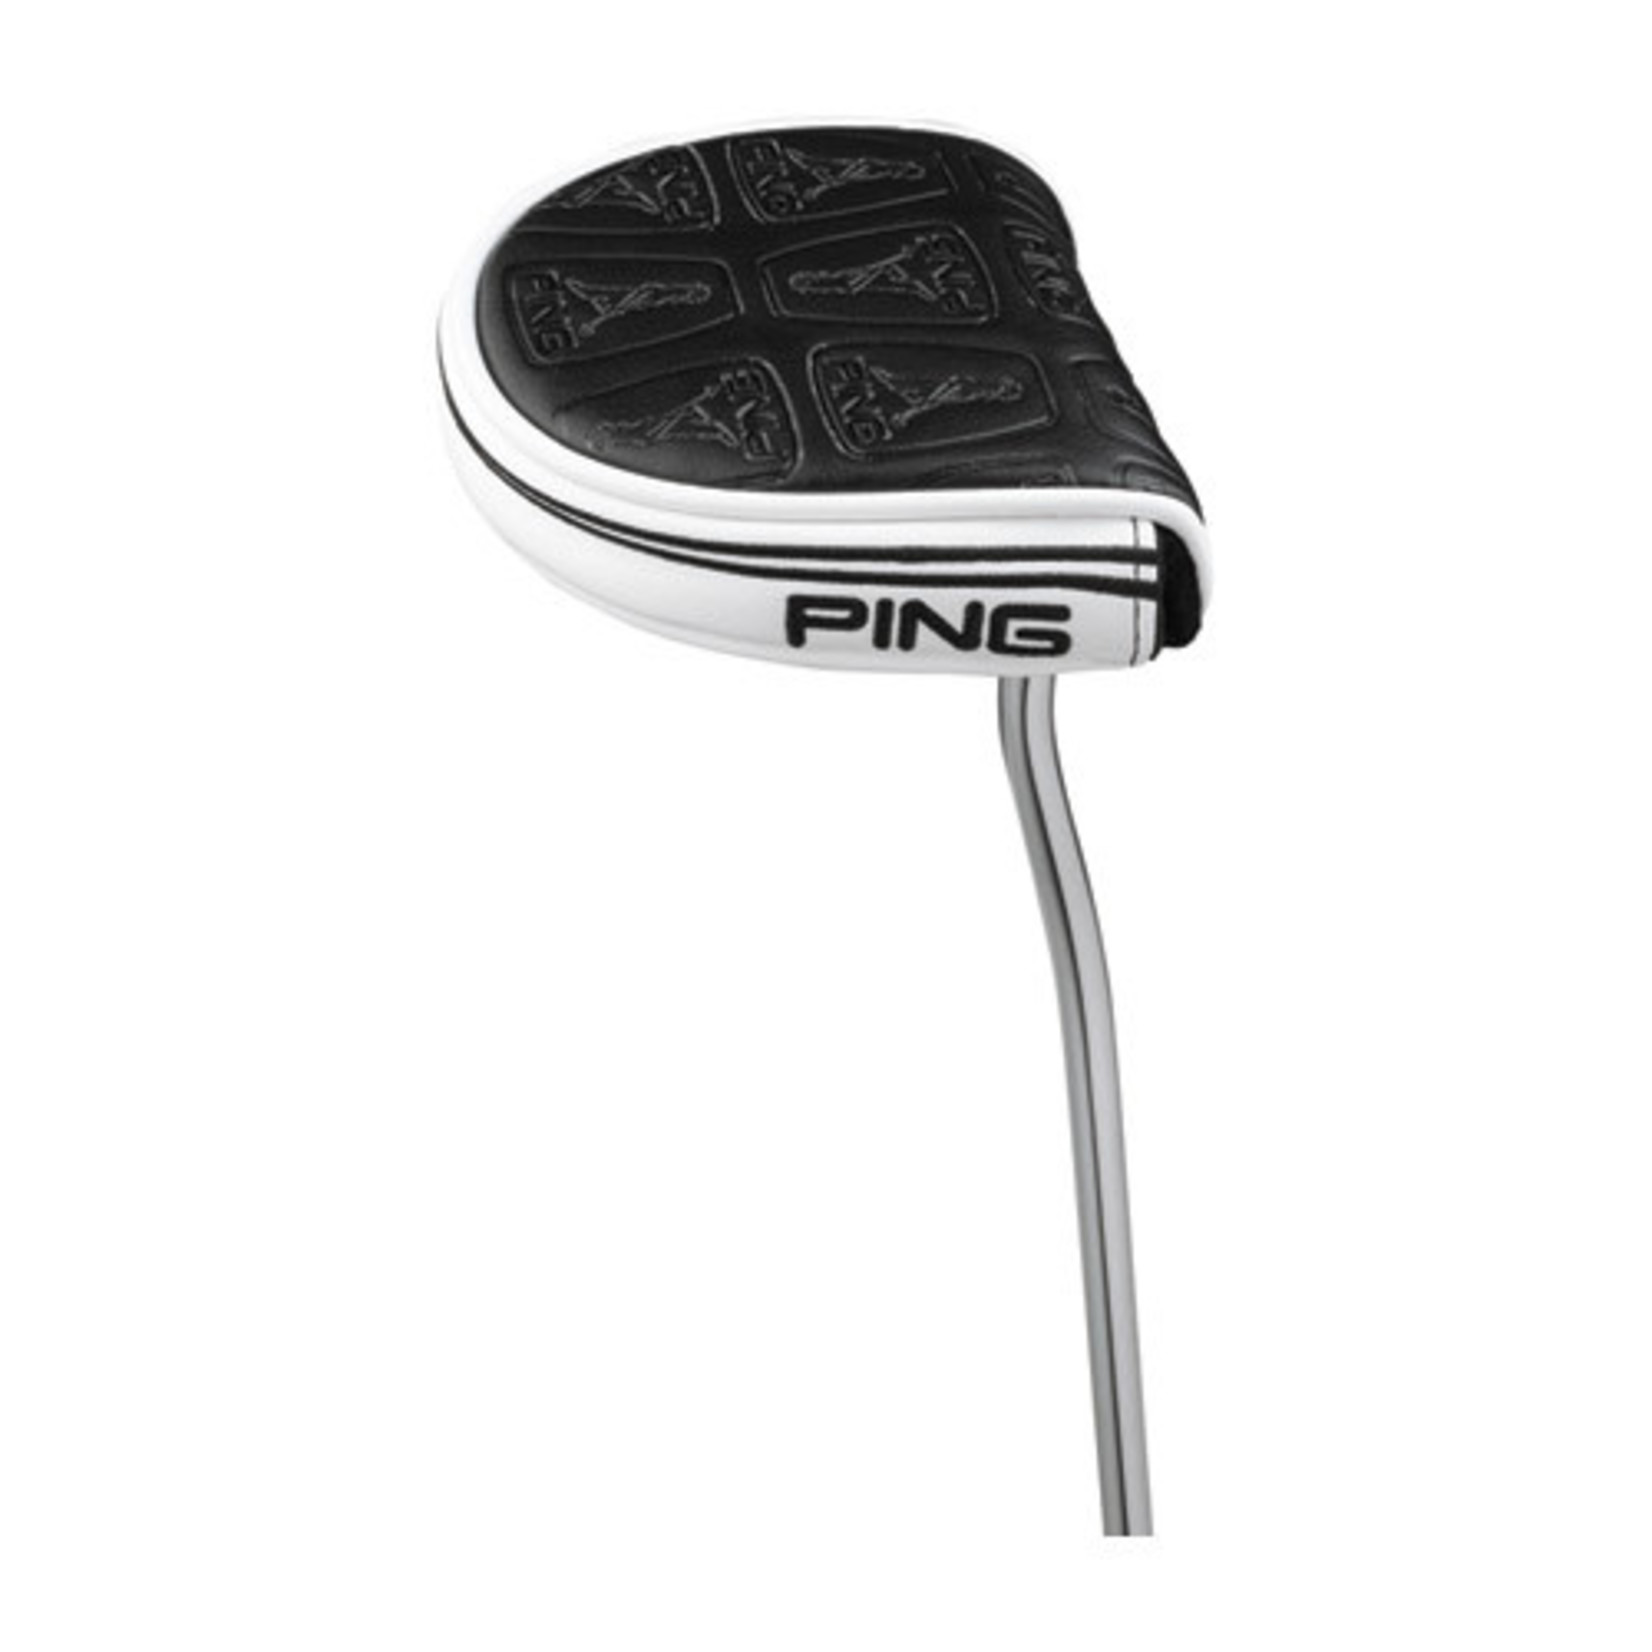 PING Ping core mallet putter cover